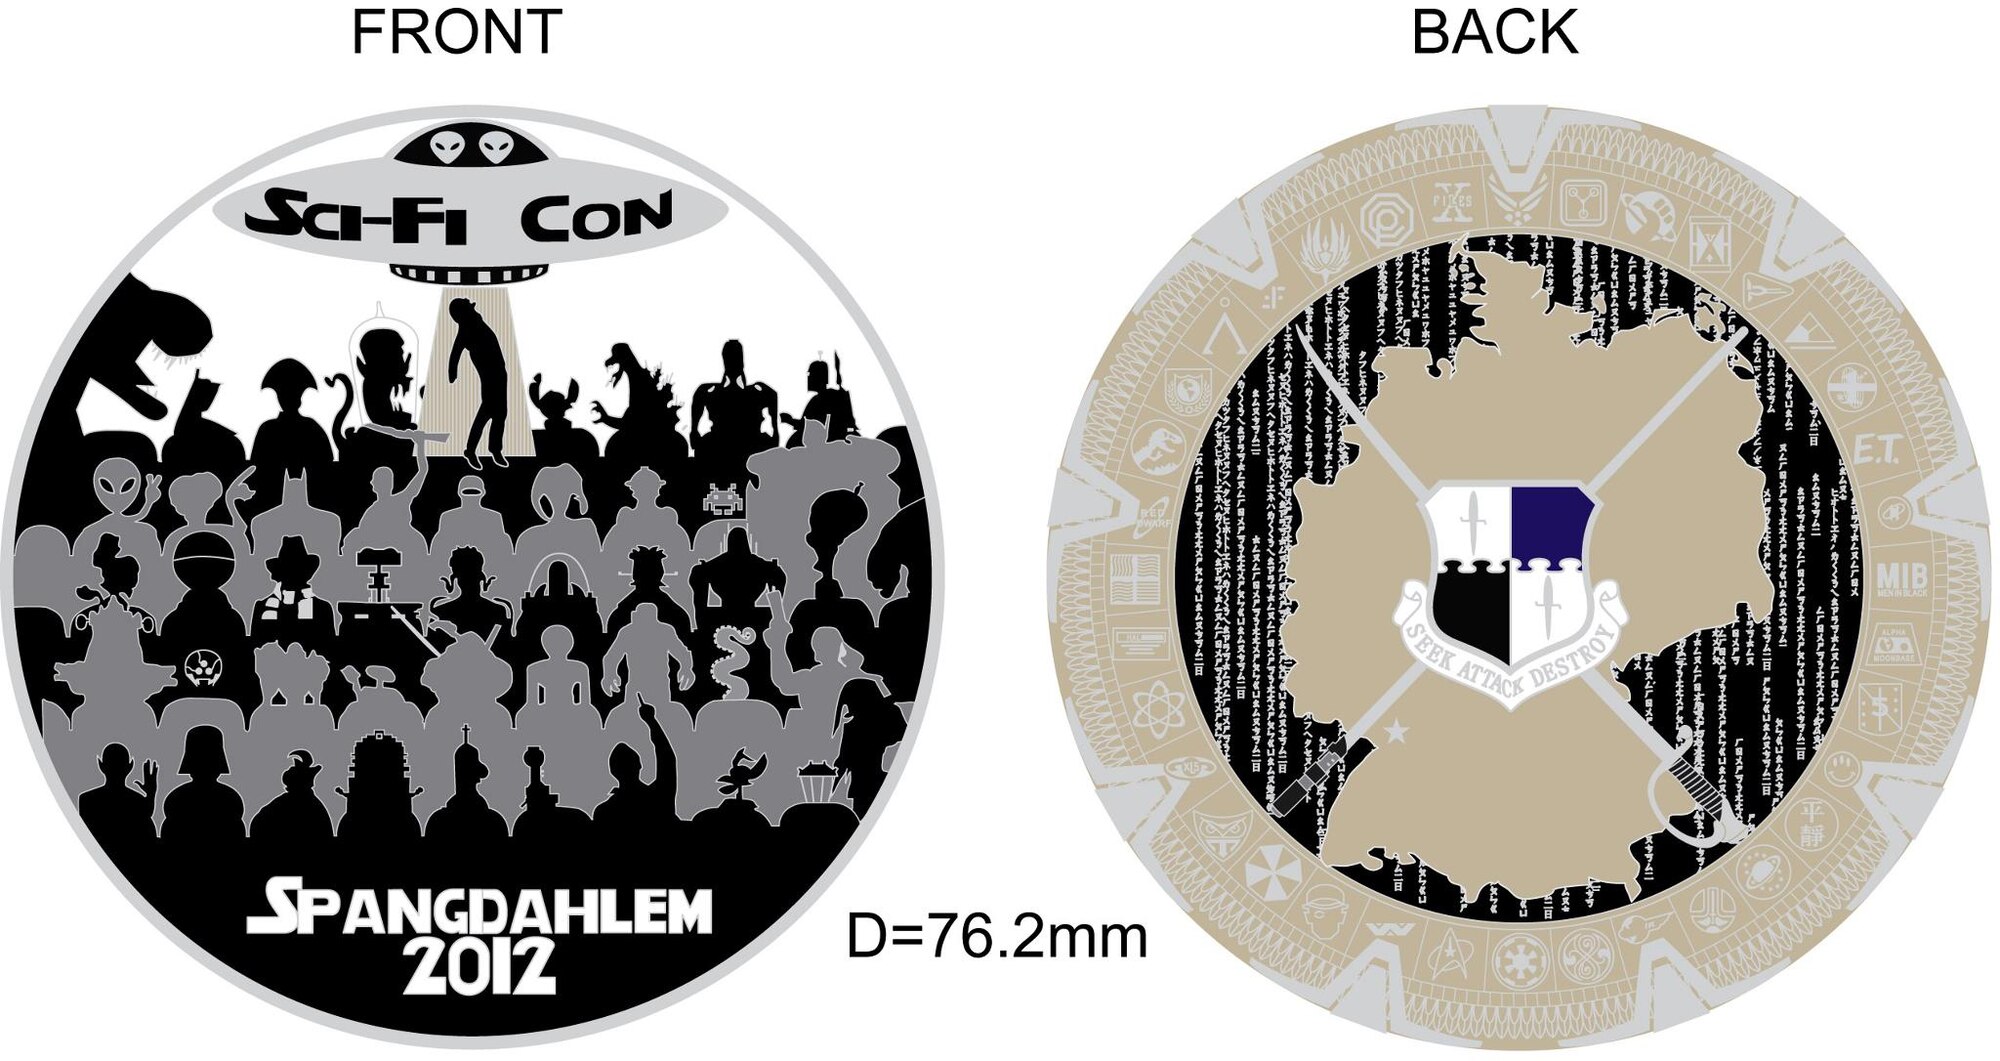 SPANGDAHLEM AIR BASE, Germany -- A custom-made coin is available for early goers of the free science fiction convention taking place noon – 6 p.m. Nov. 3 at Club Eifel here. (Courtesy graphic)